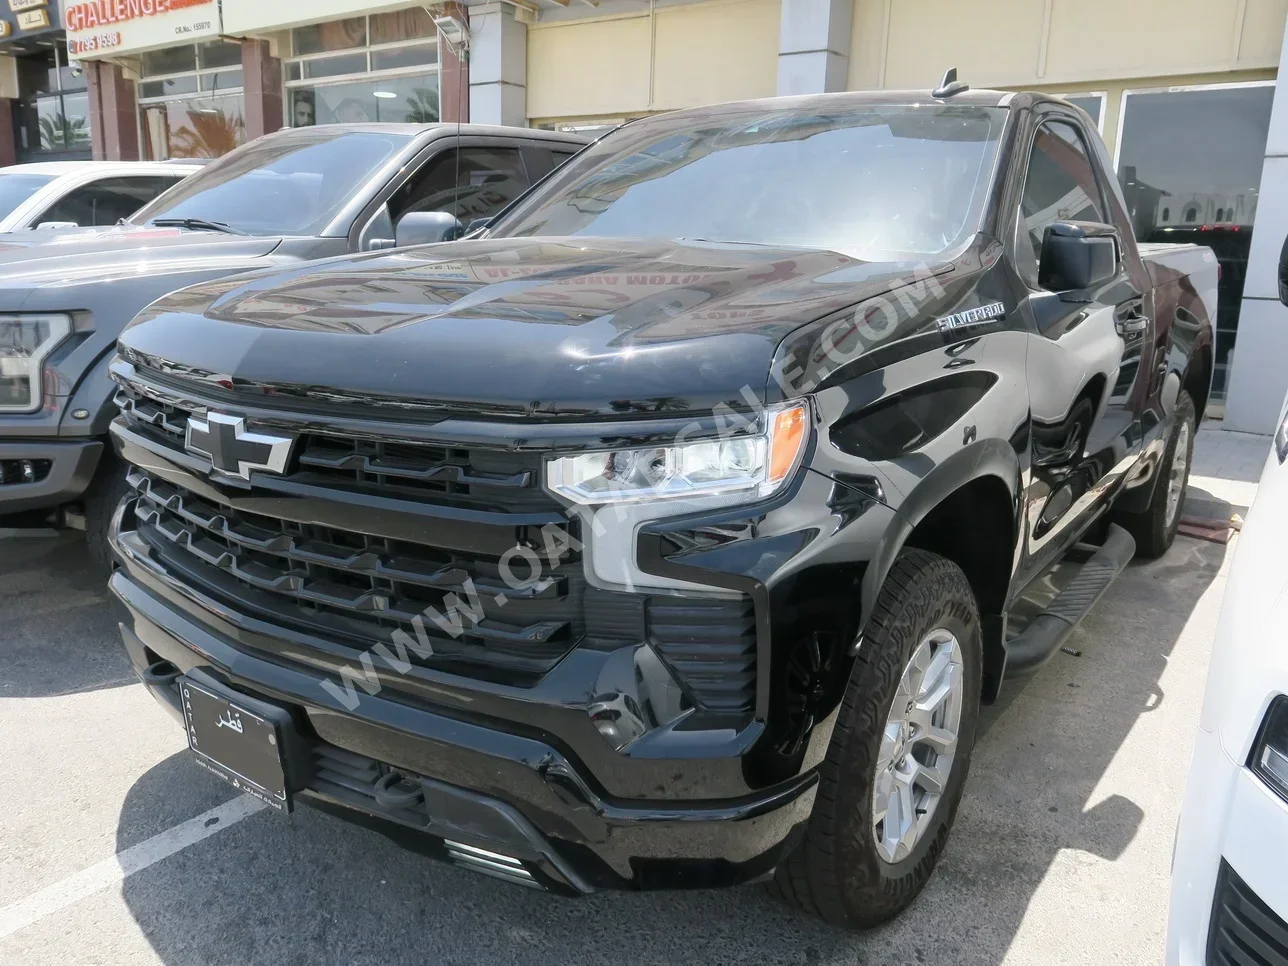 Chevrolet  Silverado  RST  2023  Automatic  22,000 Km  6 Cylinder  Four Wheel Drive (4WD)  Pick Up  Black  With Warranty